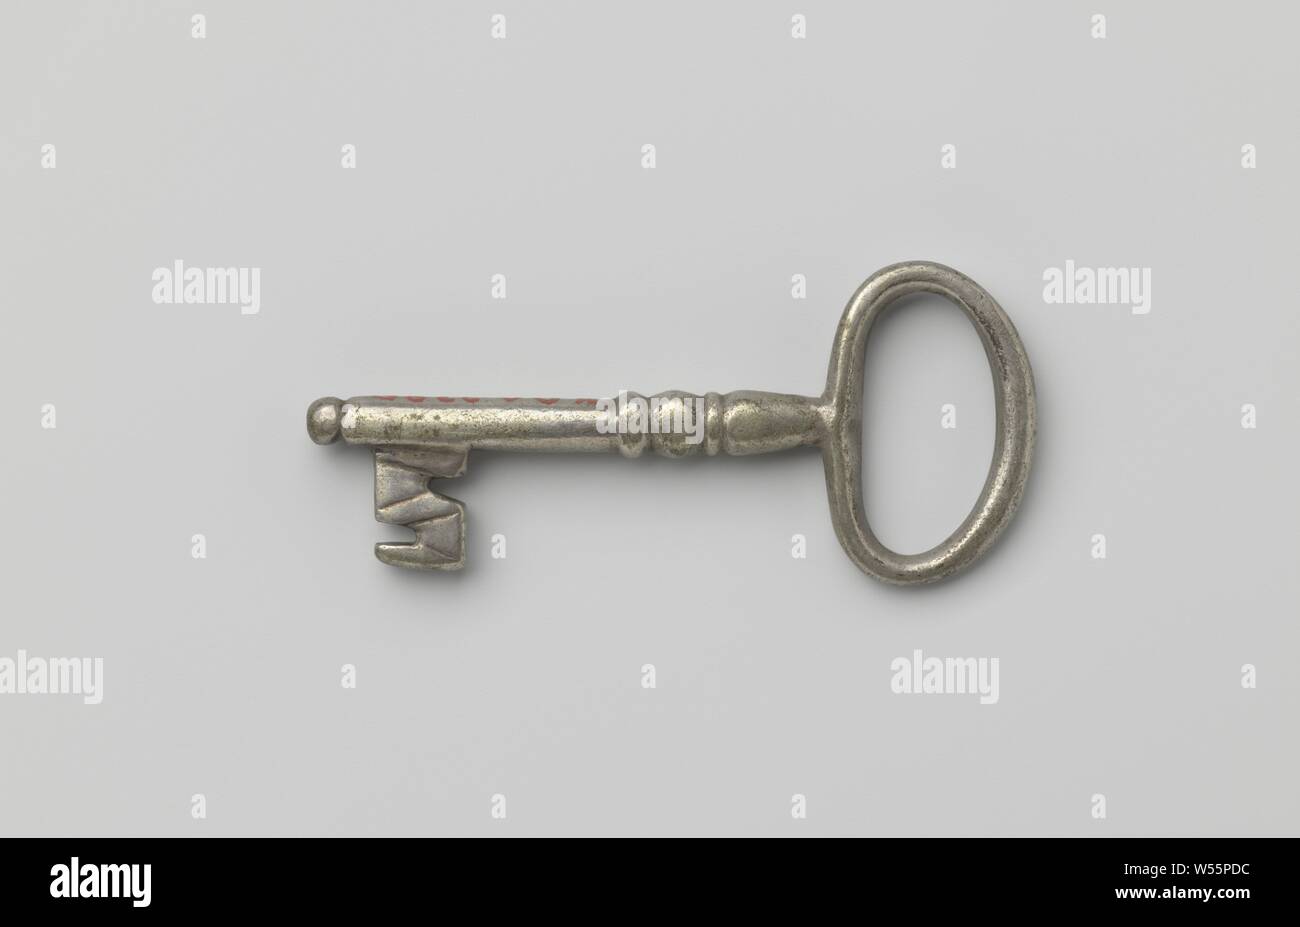 Key with oval eye, simple profiled shaft that runs past the beard and ends in a button., c. 1600 - c. 1699, silver (metal), l 5.7 cm × w 2.5 cm Stock Photo